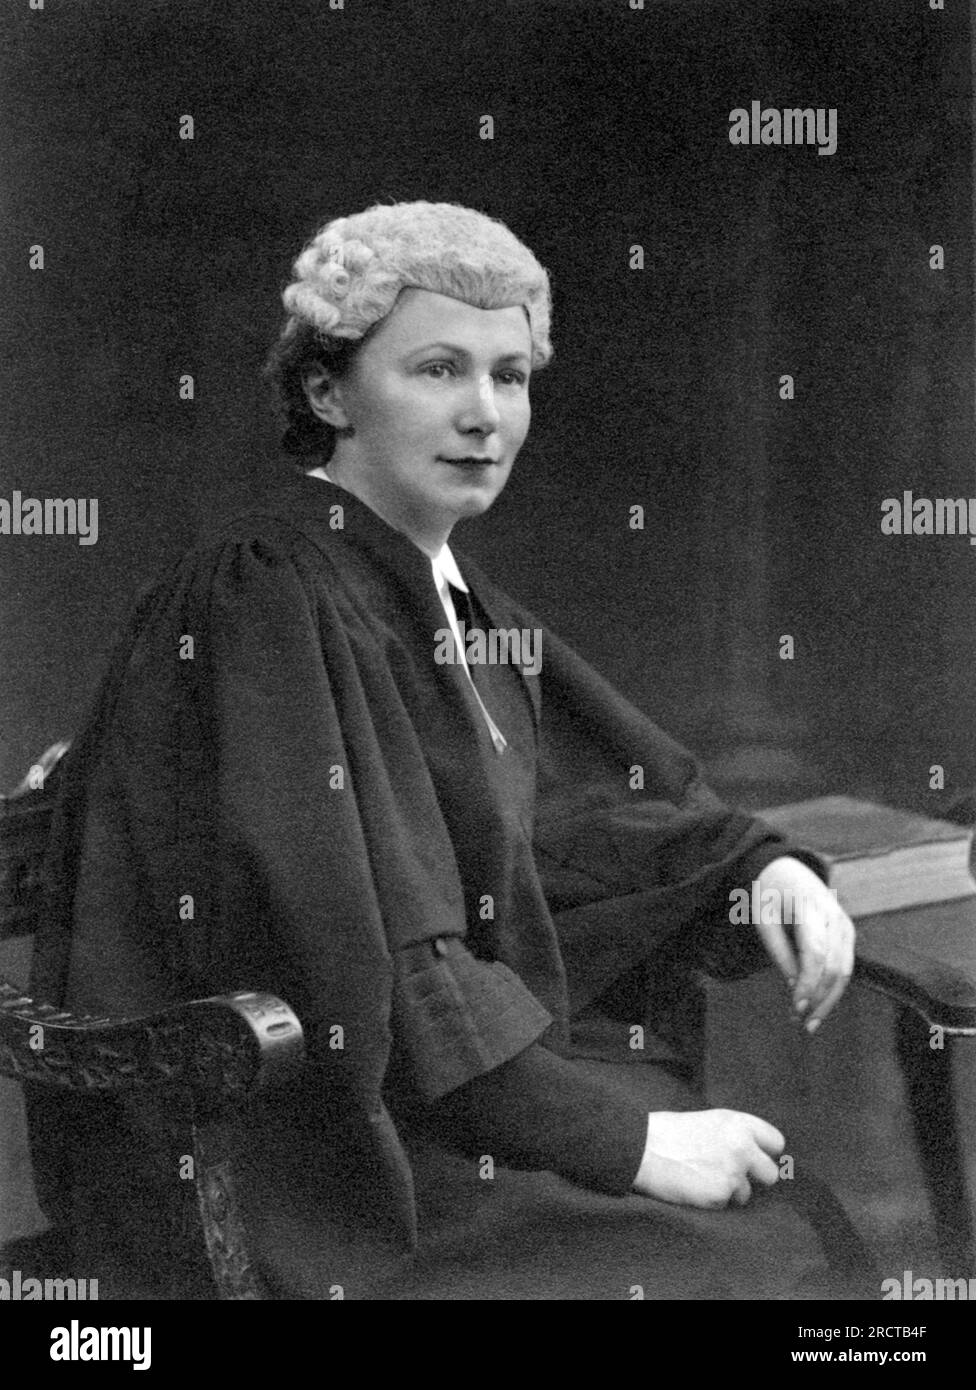 London, England:  c. 1928. A portrait of a young woman judge wearing the British wig seated at a desk. Stock Photo